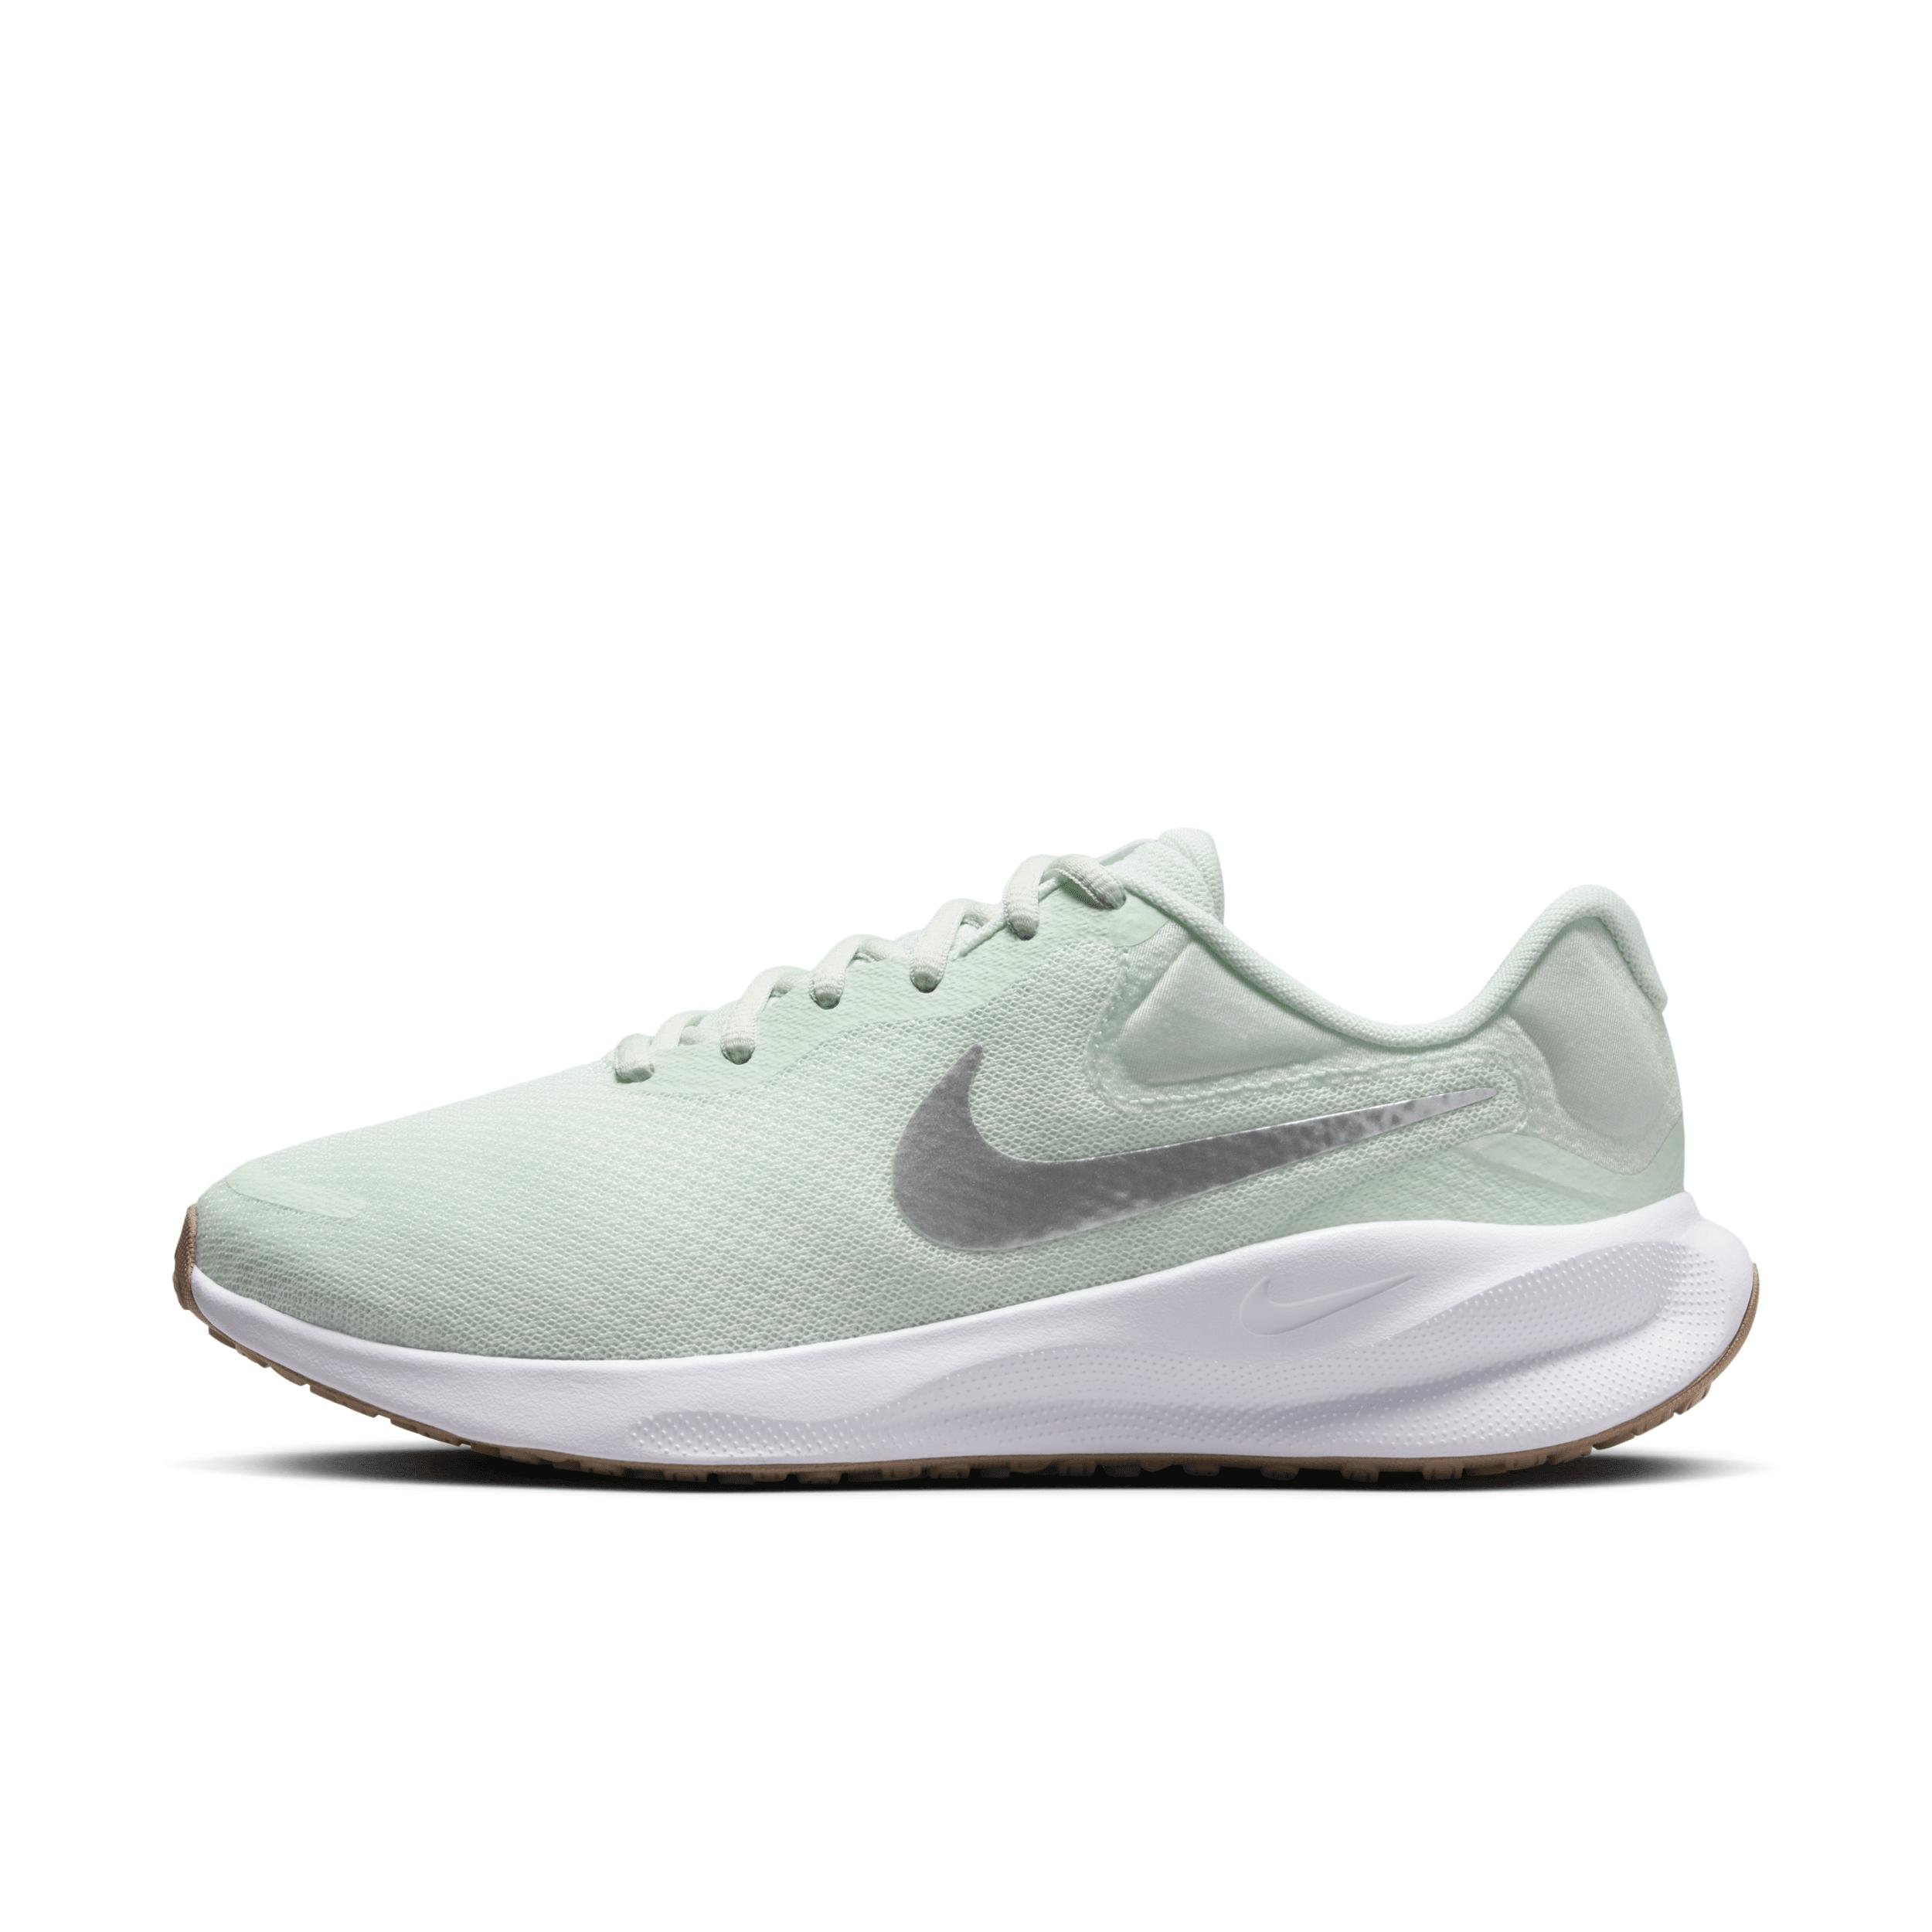 Nike Women's Revolution 7 Road Running Shoes (Extra Wide) by NIKE